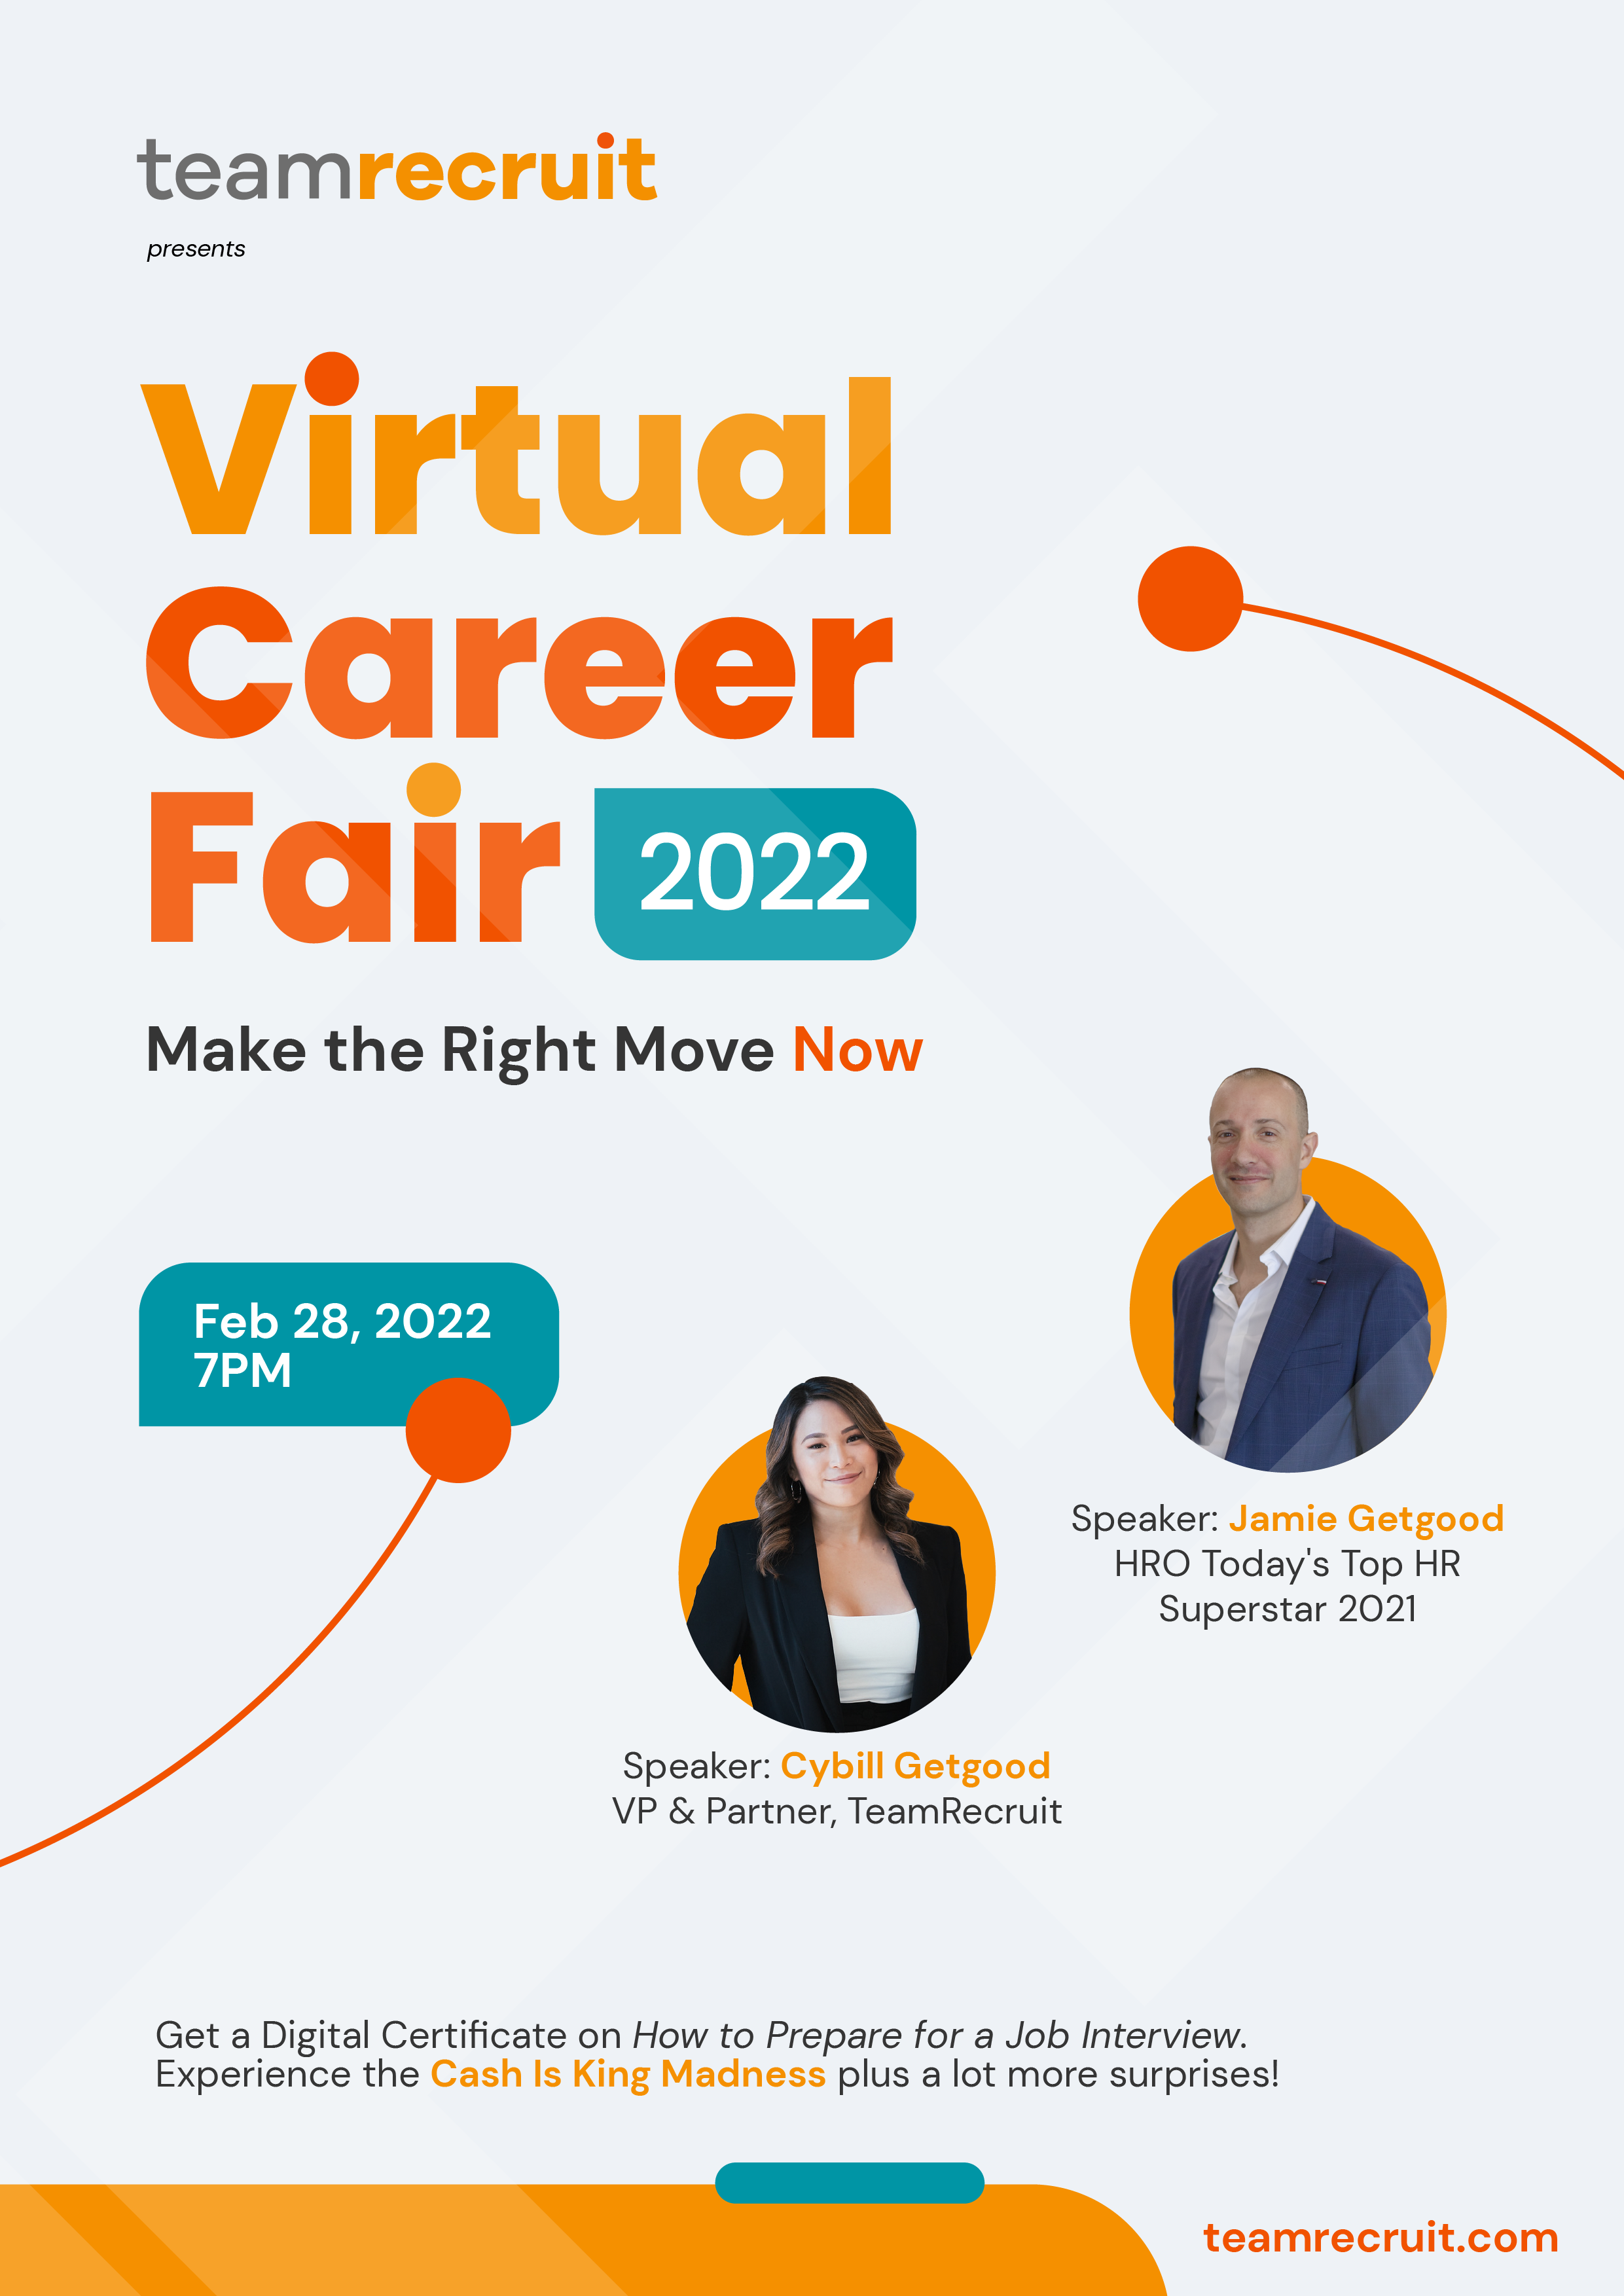 Featured image for “Virtual Career Fair 2022”